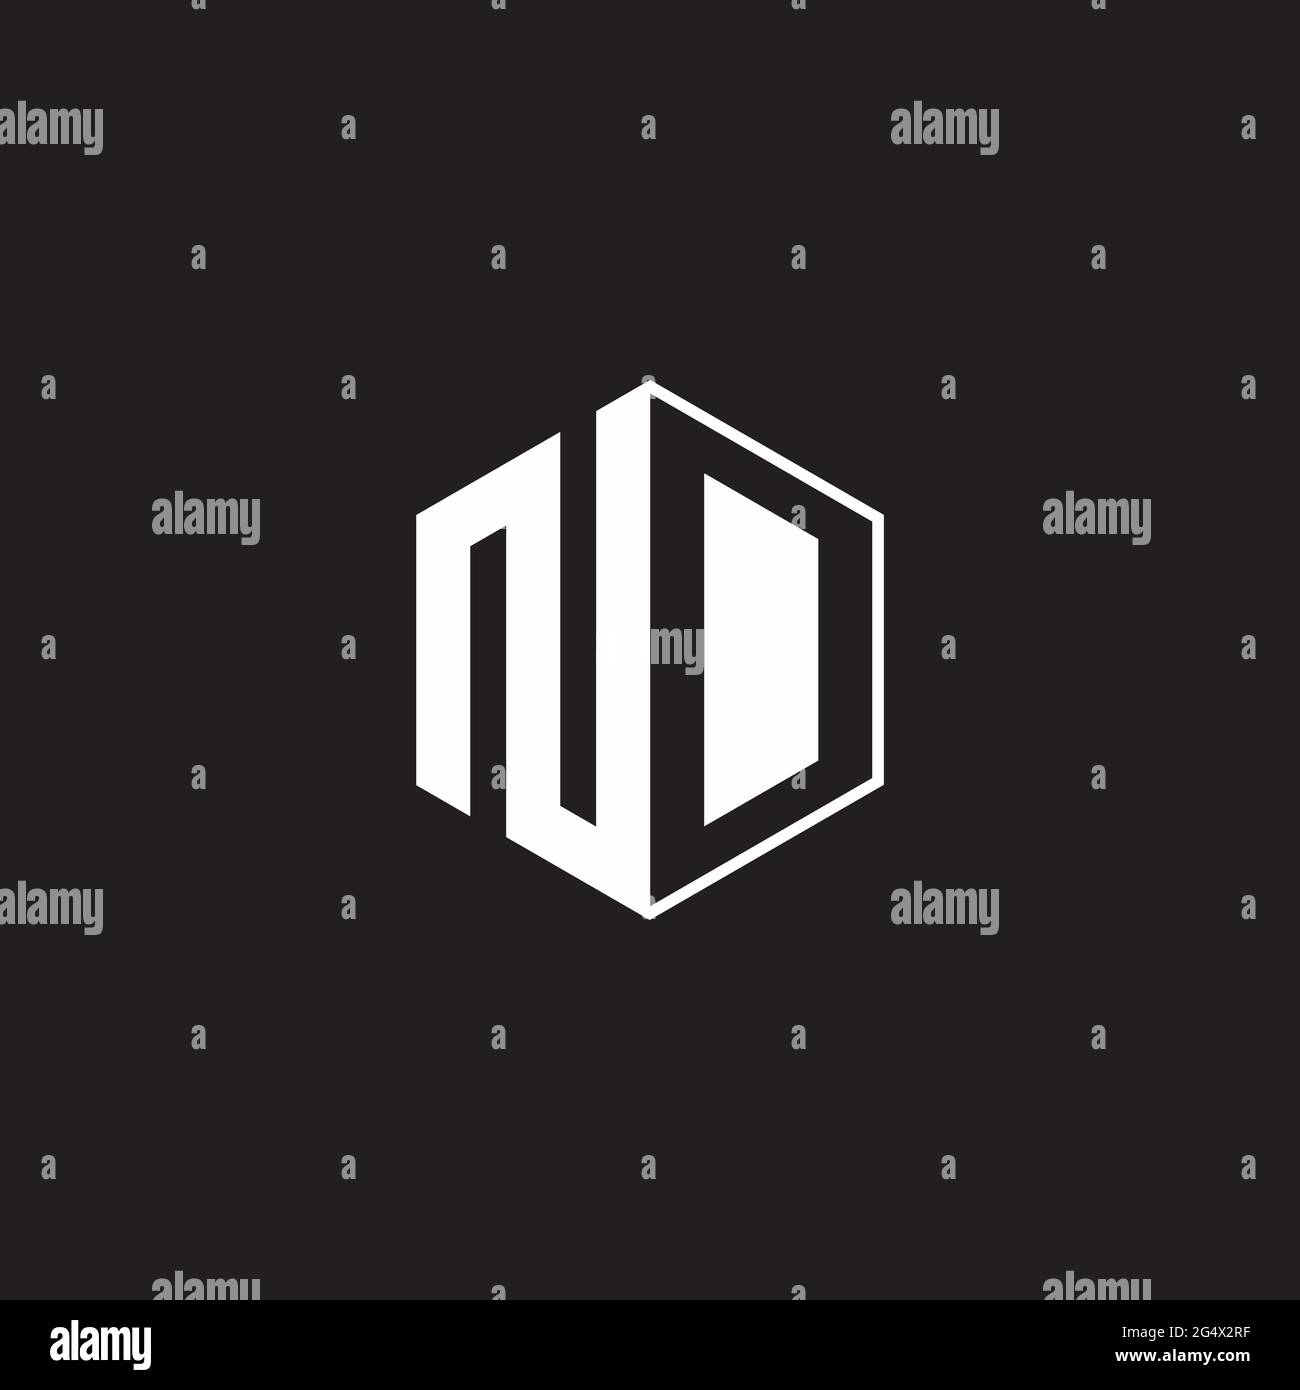 ND N D DN Logo monogram hexagon with black background negative space style Stock Vector